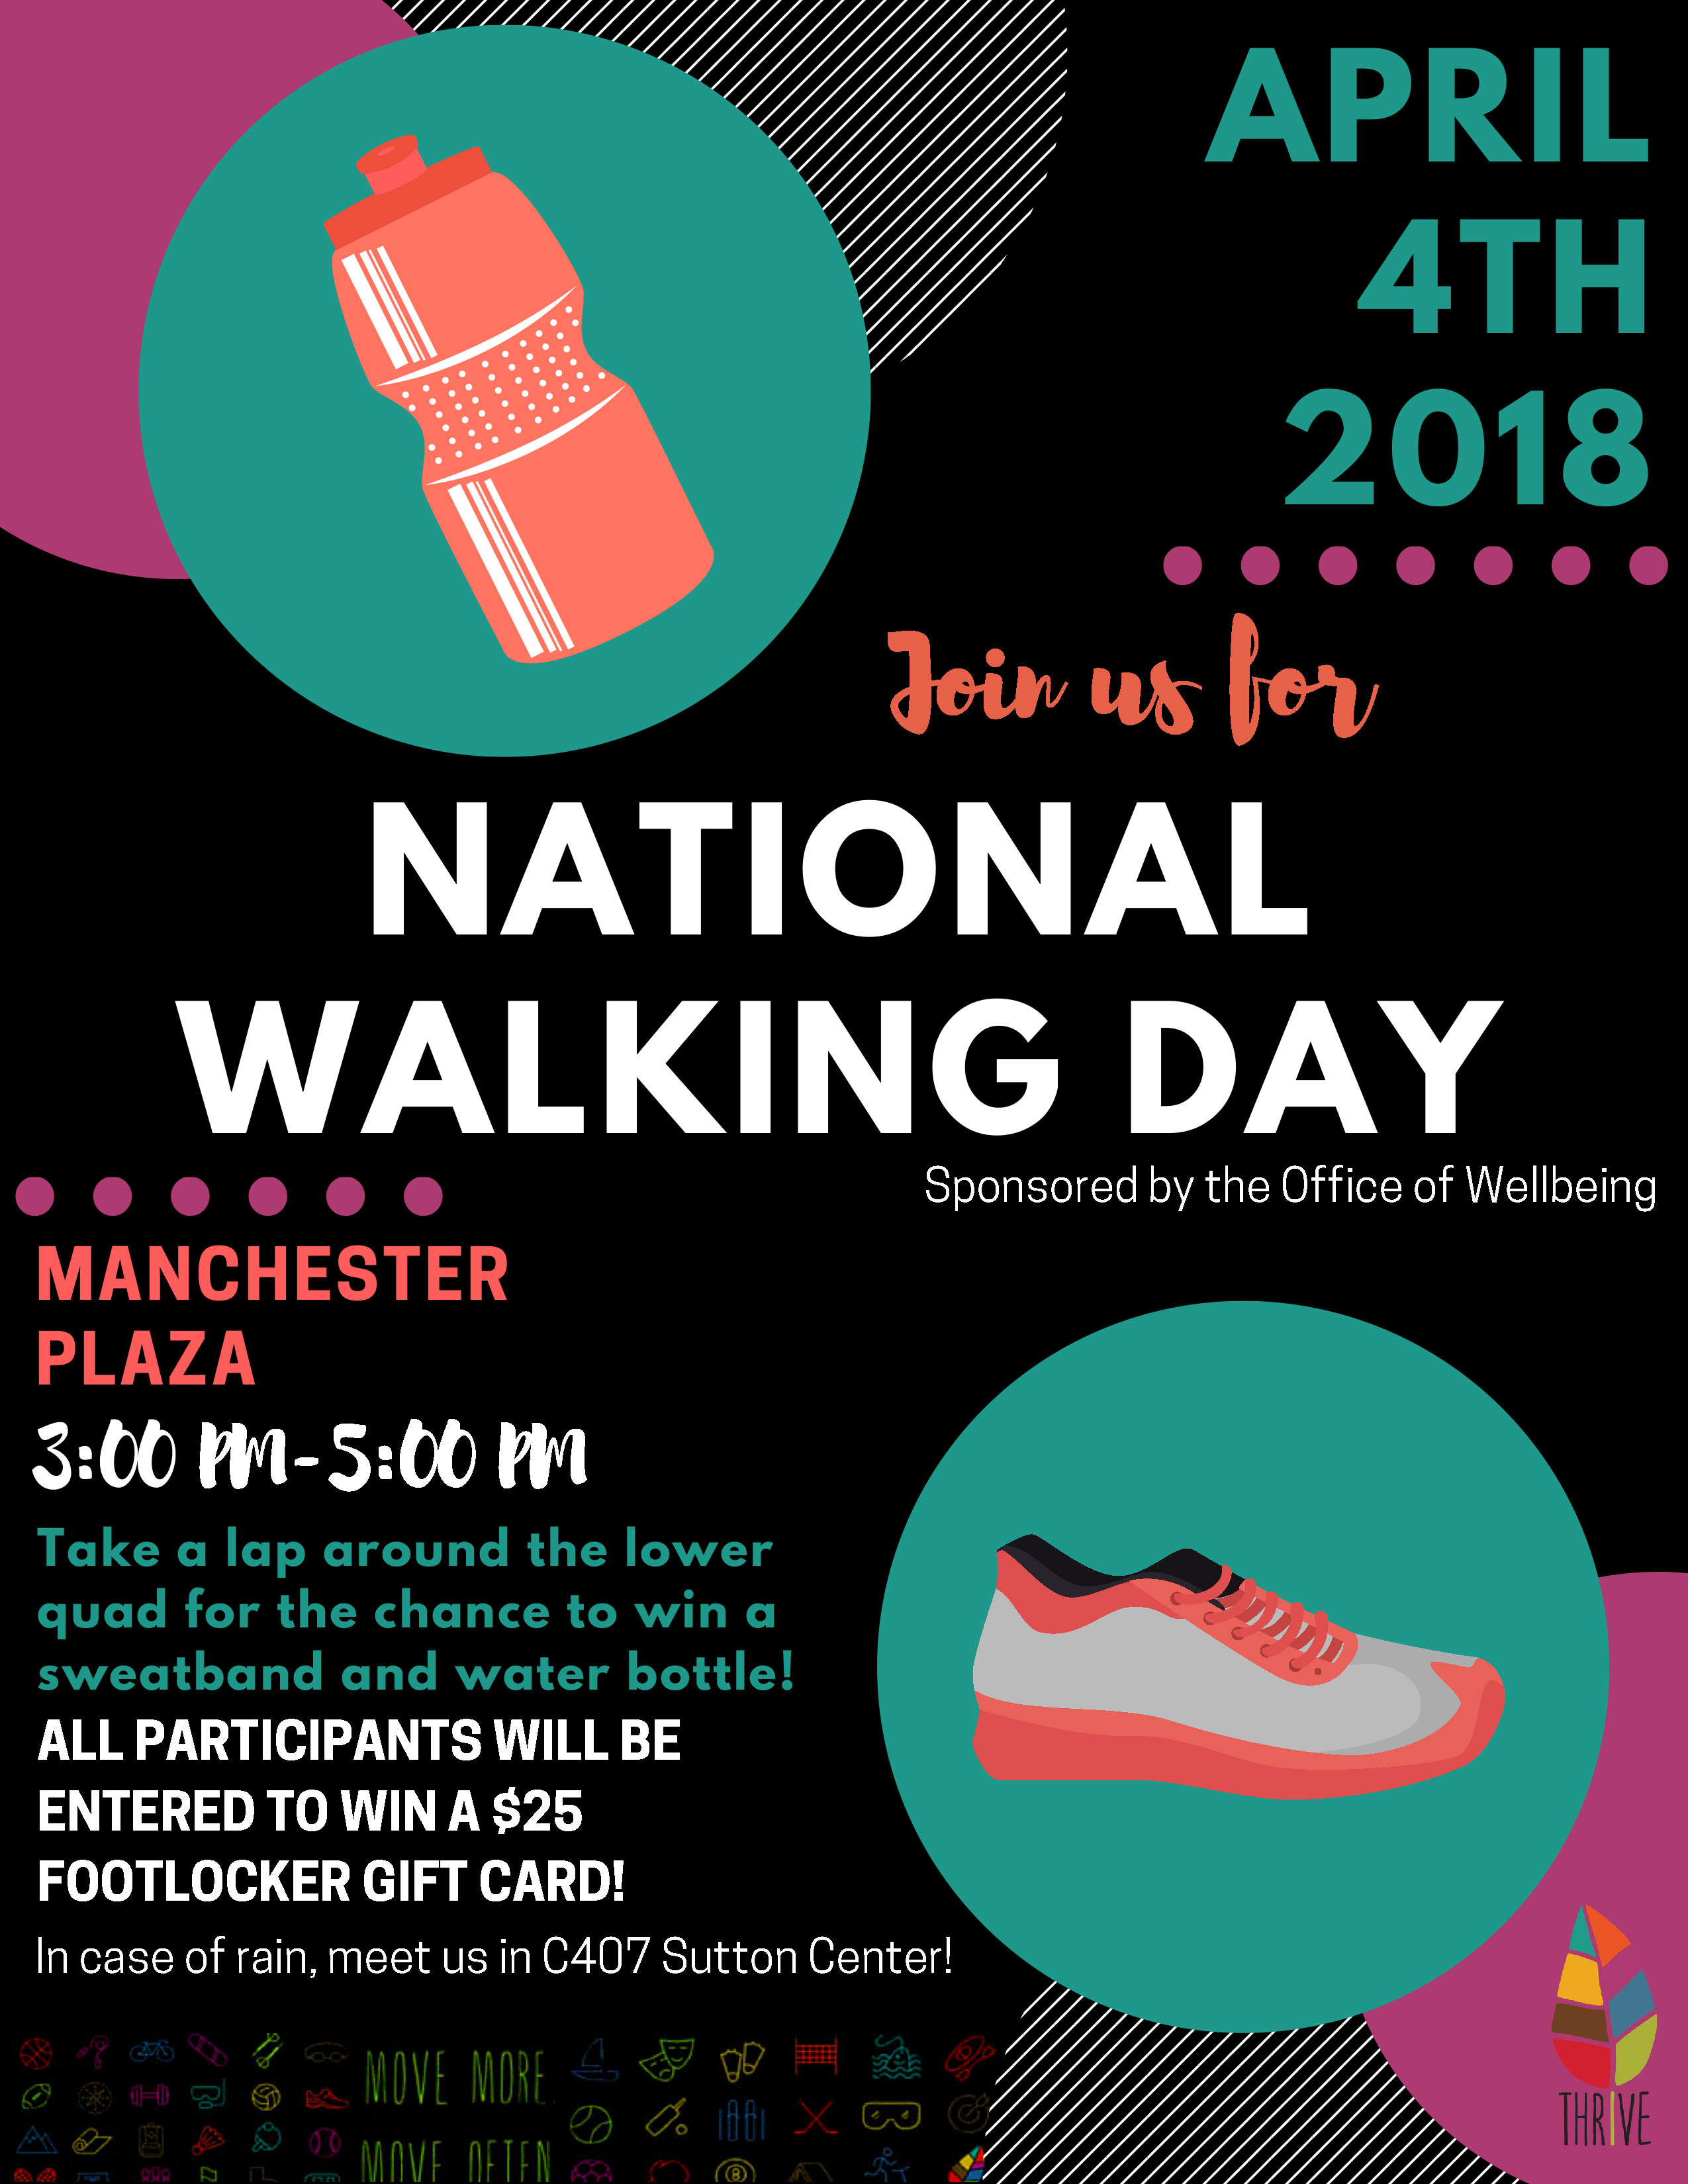 Campus community invited to participate in National Walking Day